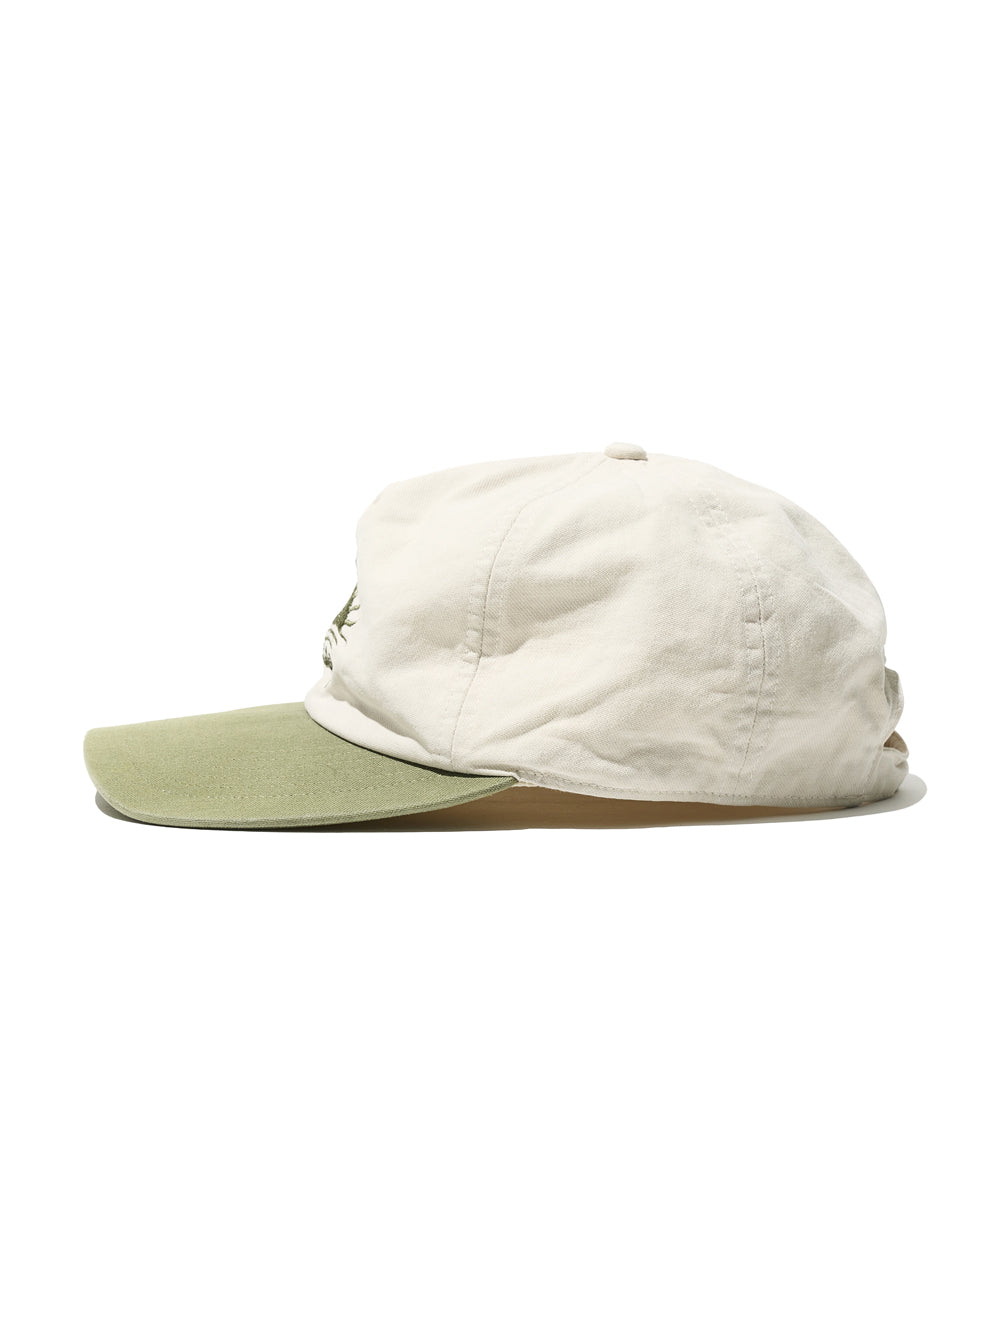 Vintage Washed Sunlight Ball Cap in Ivory Green